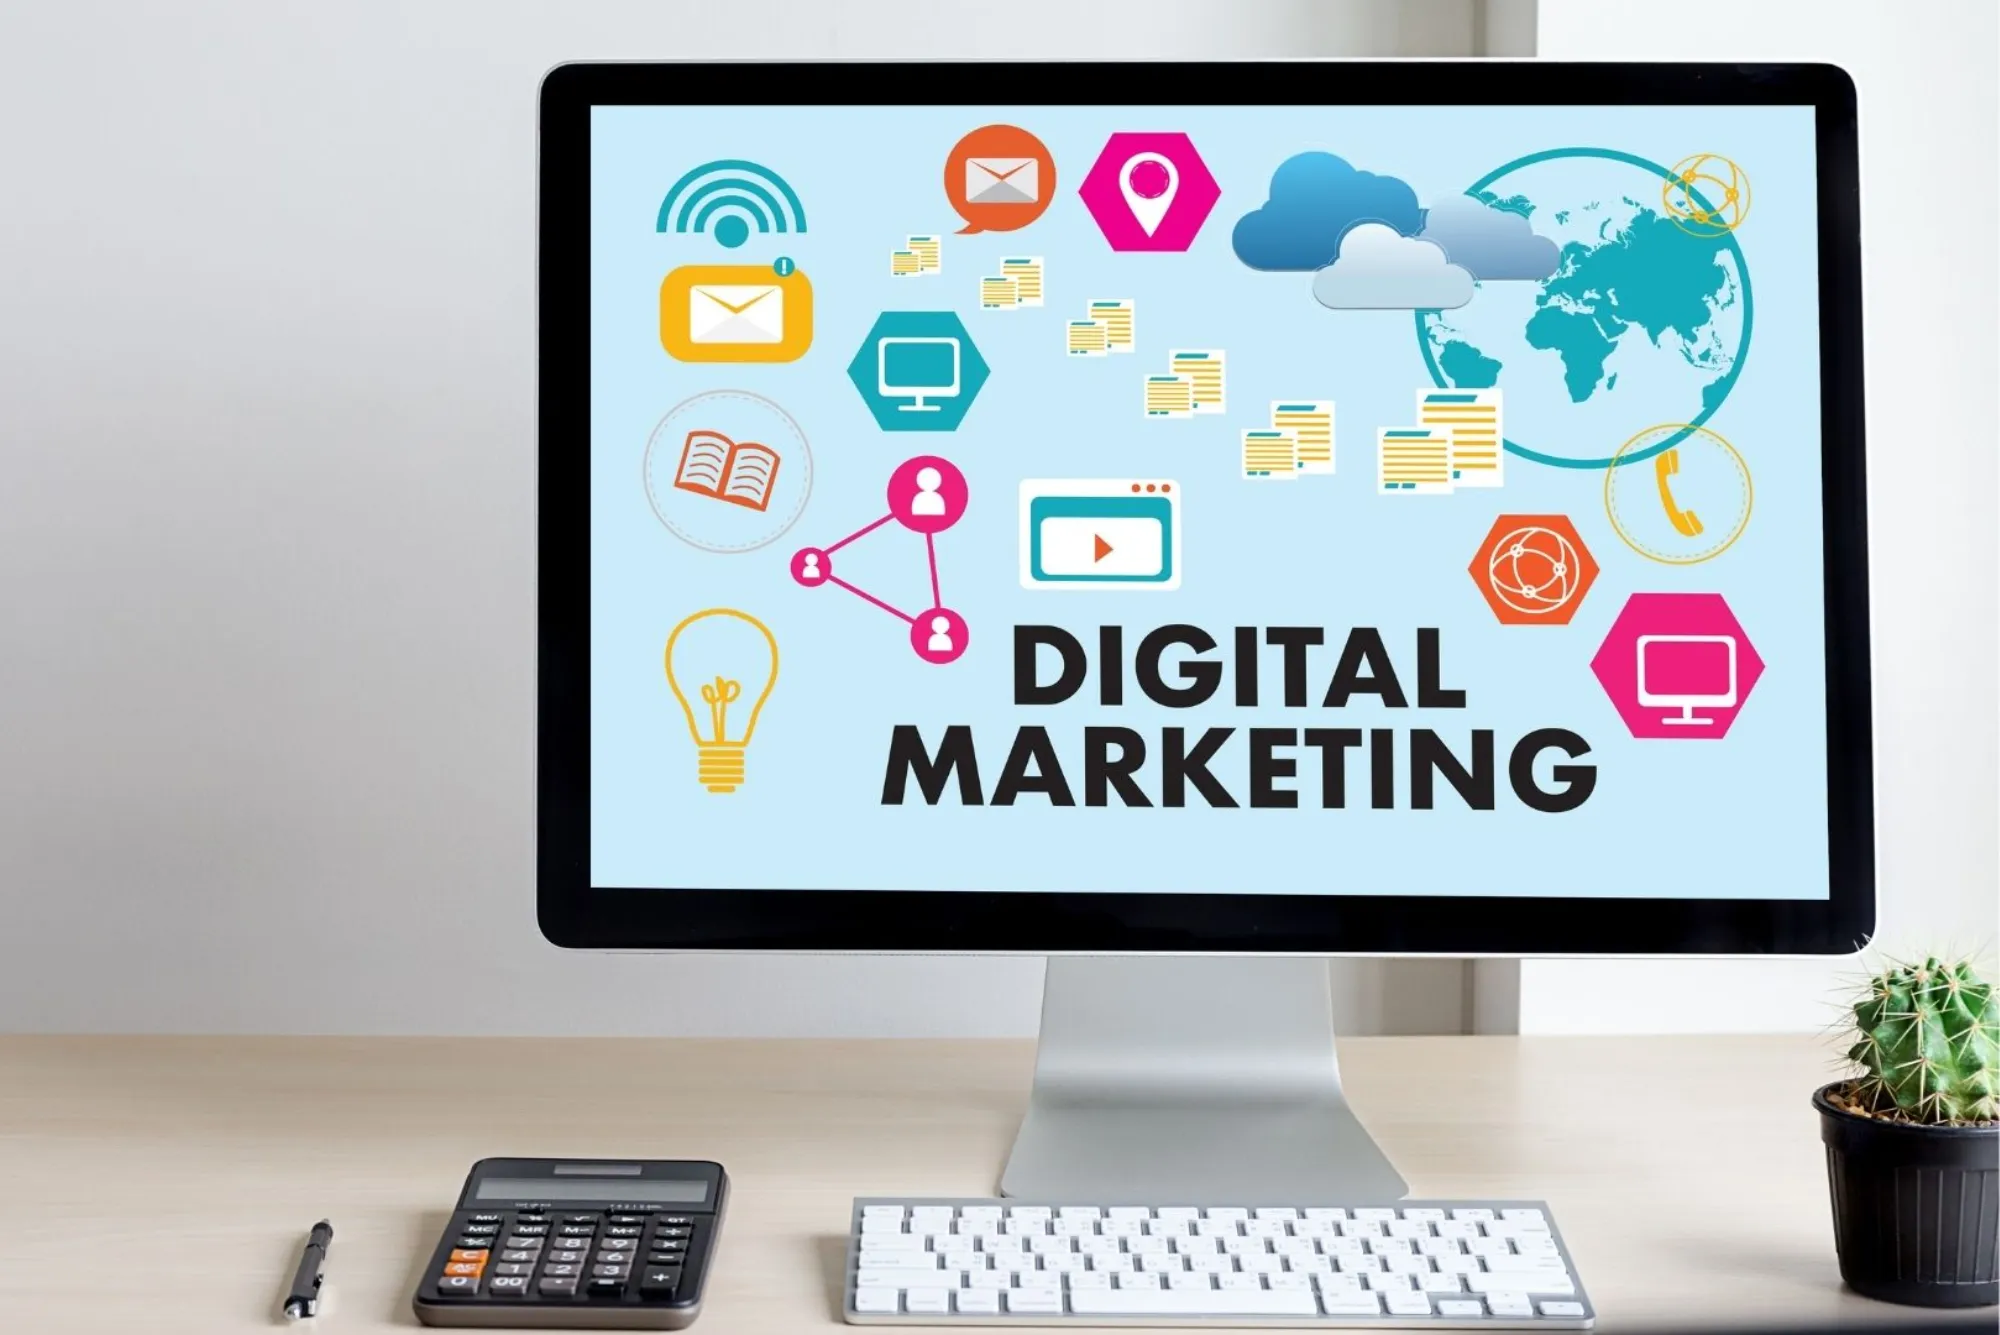 Do You Learn in Digital Marketing Course